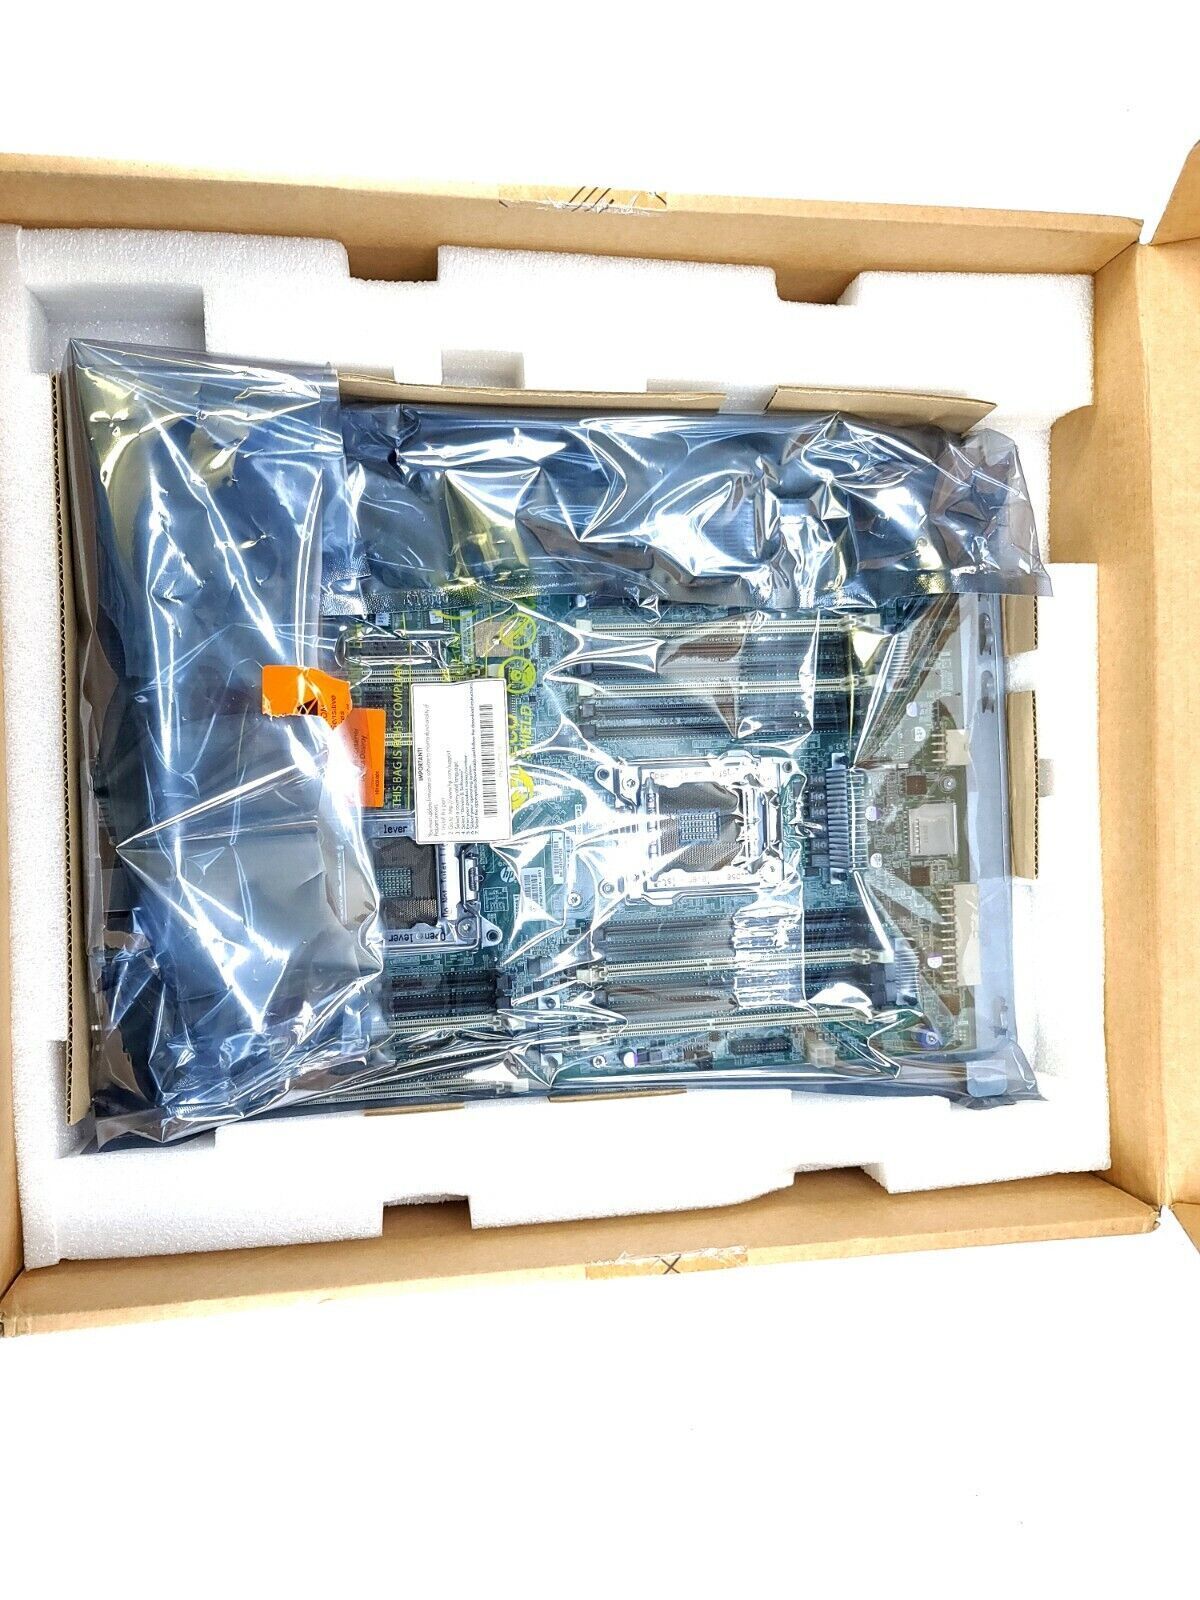 HP Proliant DL160 Gen8 Dual CPU Server System Motherboard 849120-001 - Brand New